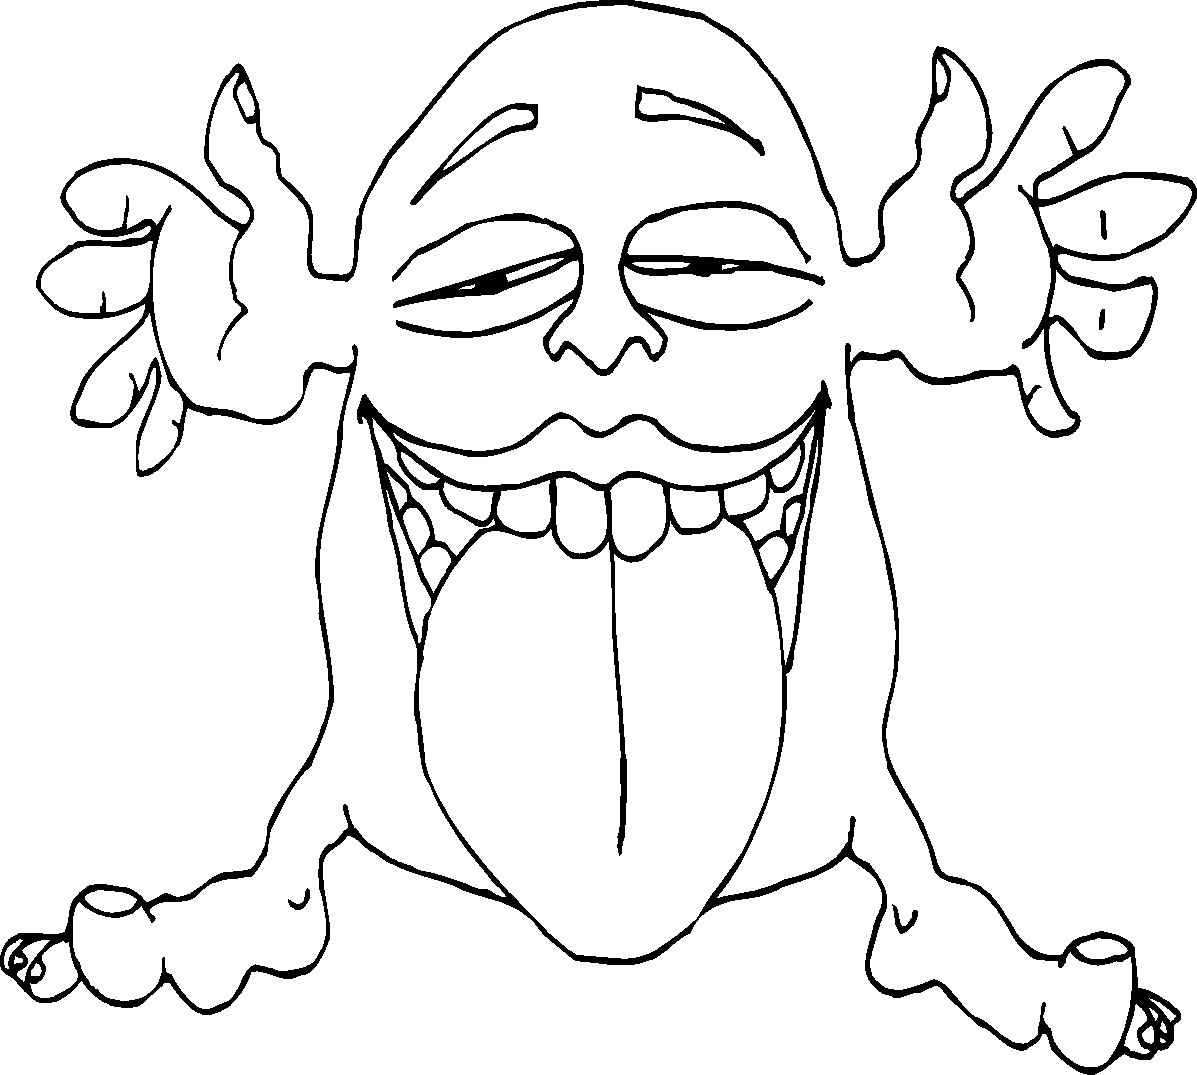 Coloring Pages | Monster Face Coloring P[Ages